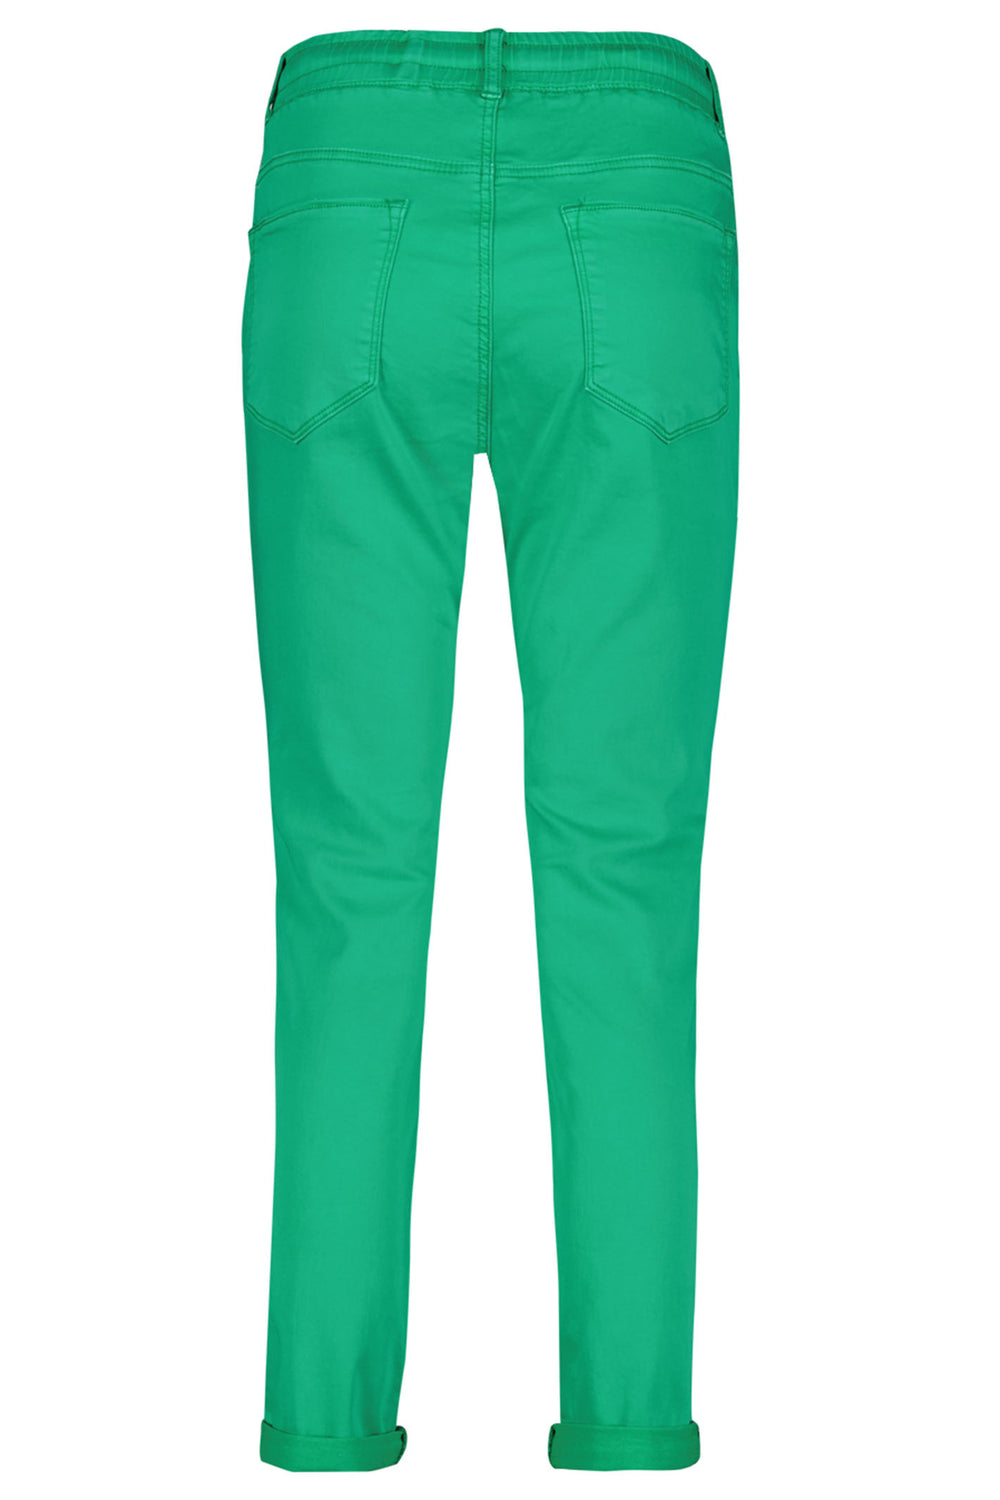 Red Button SRB4154 Tessy Fern Green Cropped Jogger Trousers - Dotique